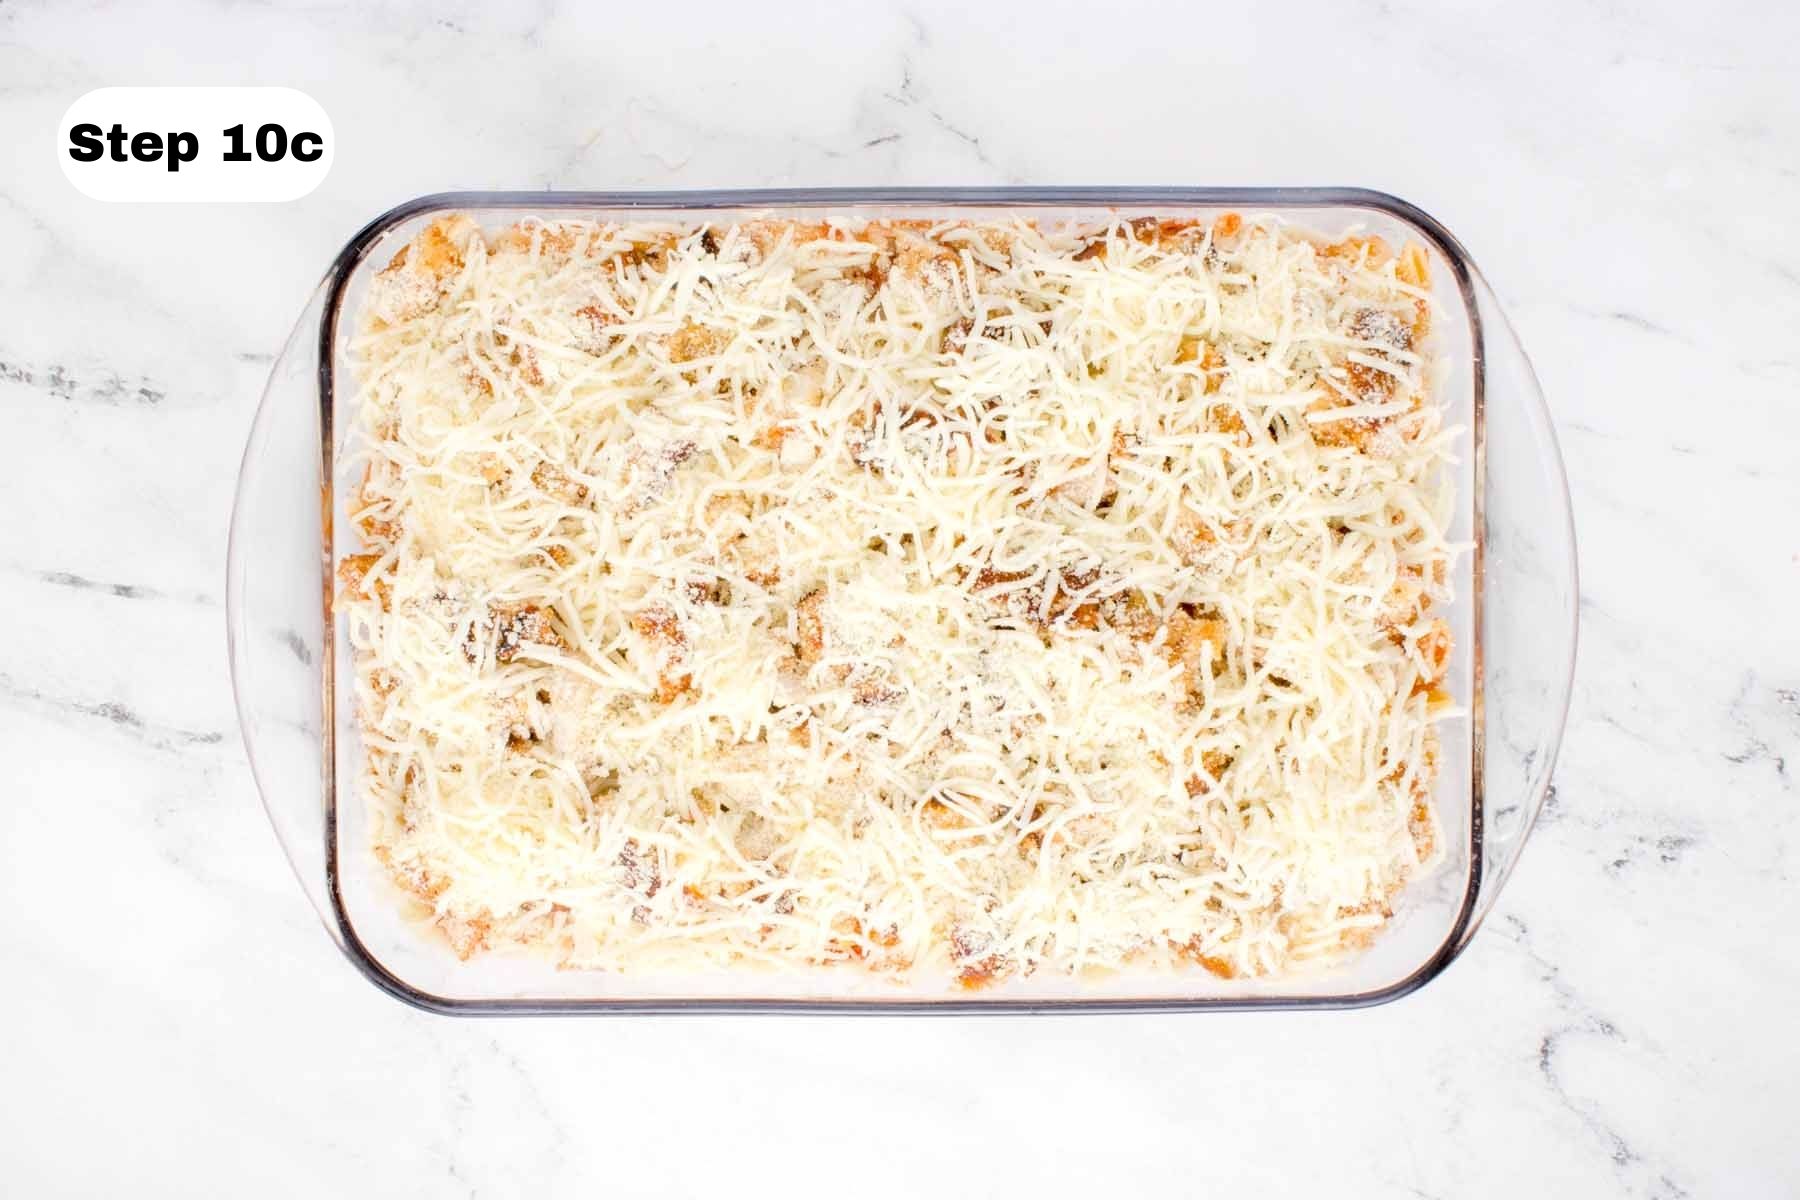 Shredded mozzarella and Parmesan layered on top of cooked chicken thigh pieces in a glass baking dish.